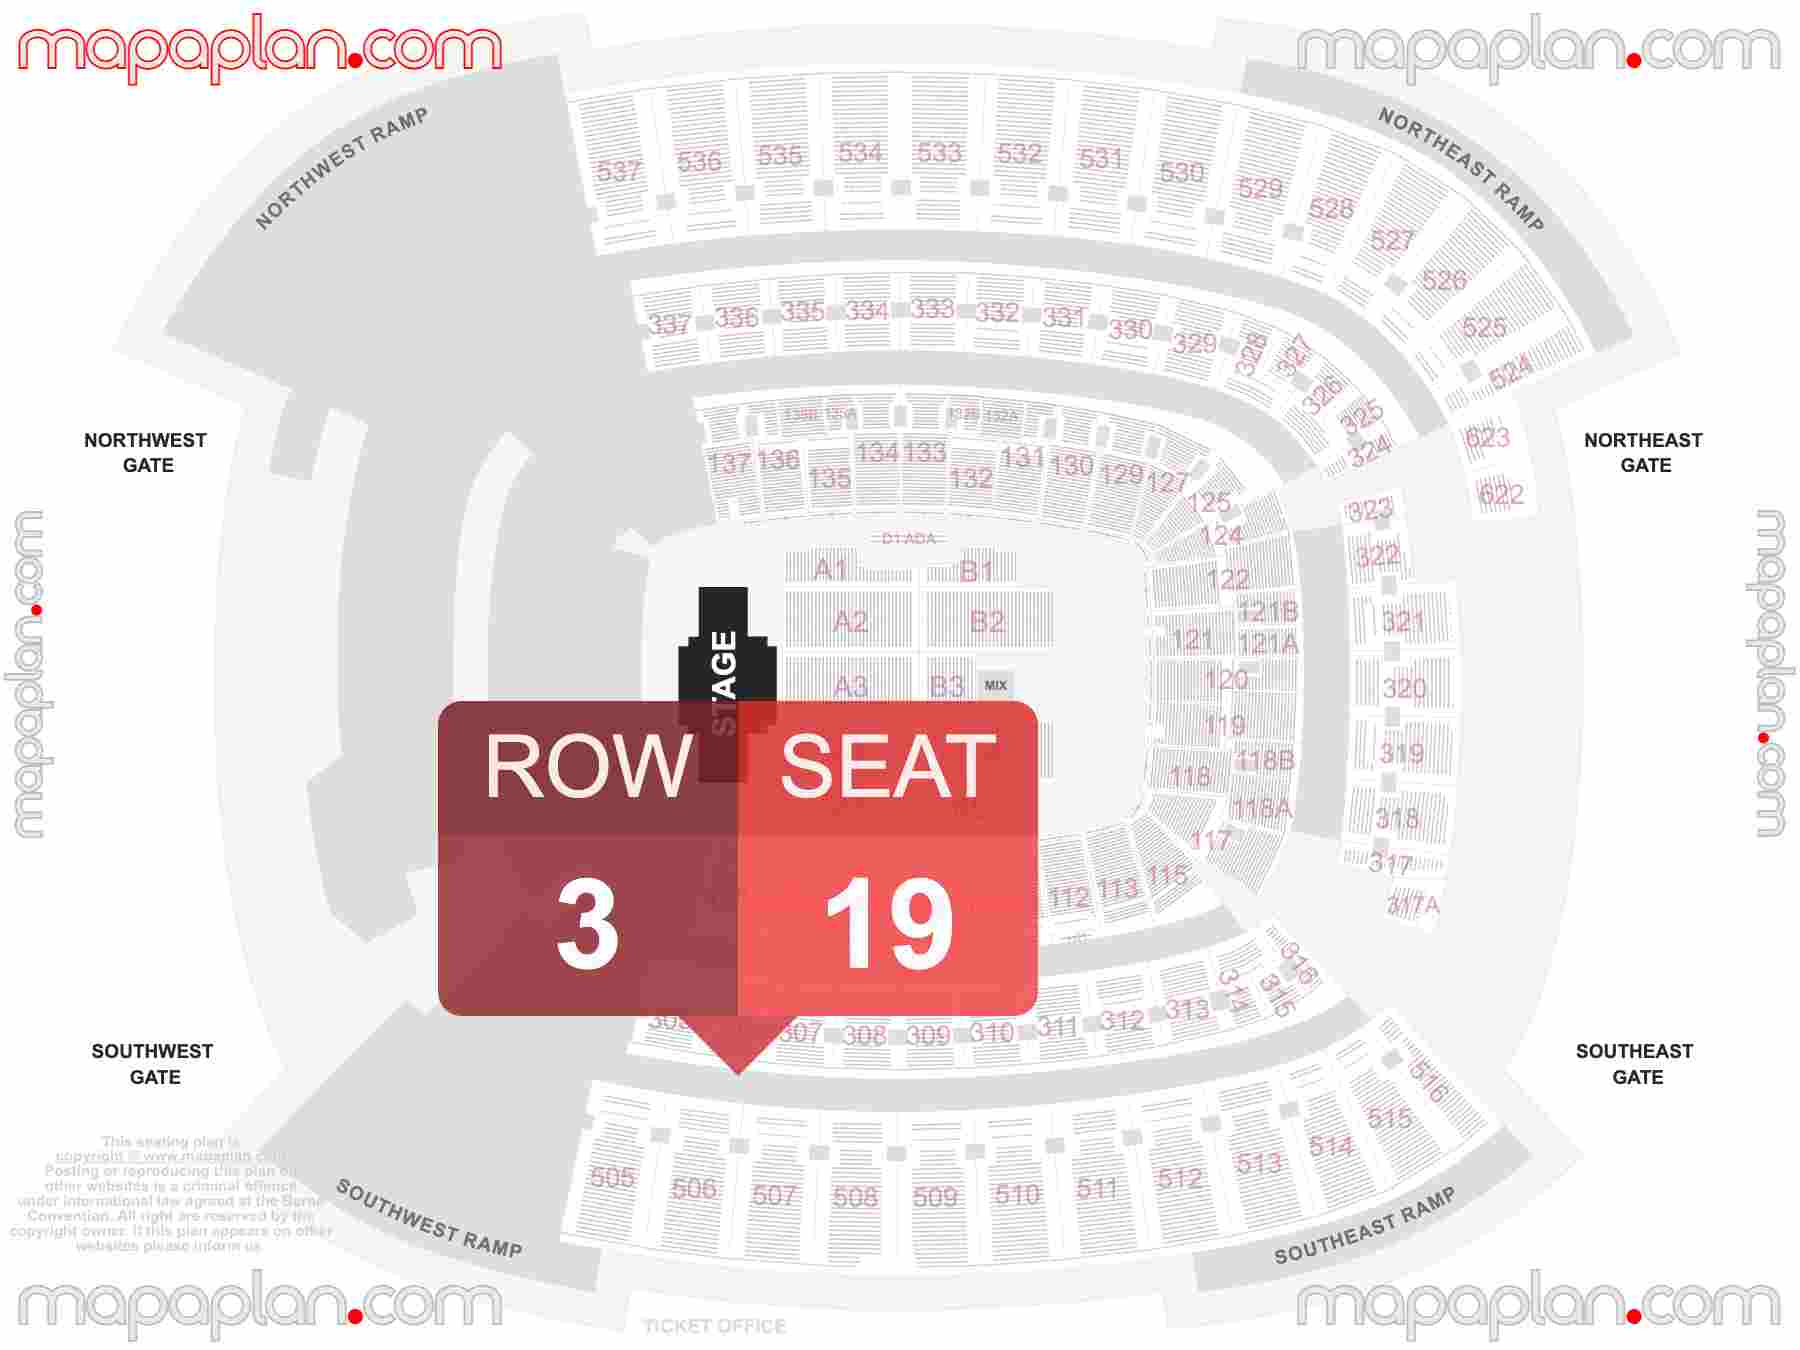 Cleveland Browns Stadium seating chart Concert detailed seat numbers and row numbering chart with interactive map plan layout